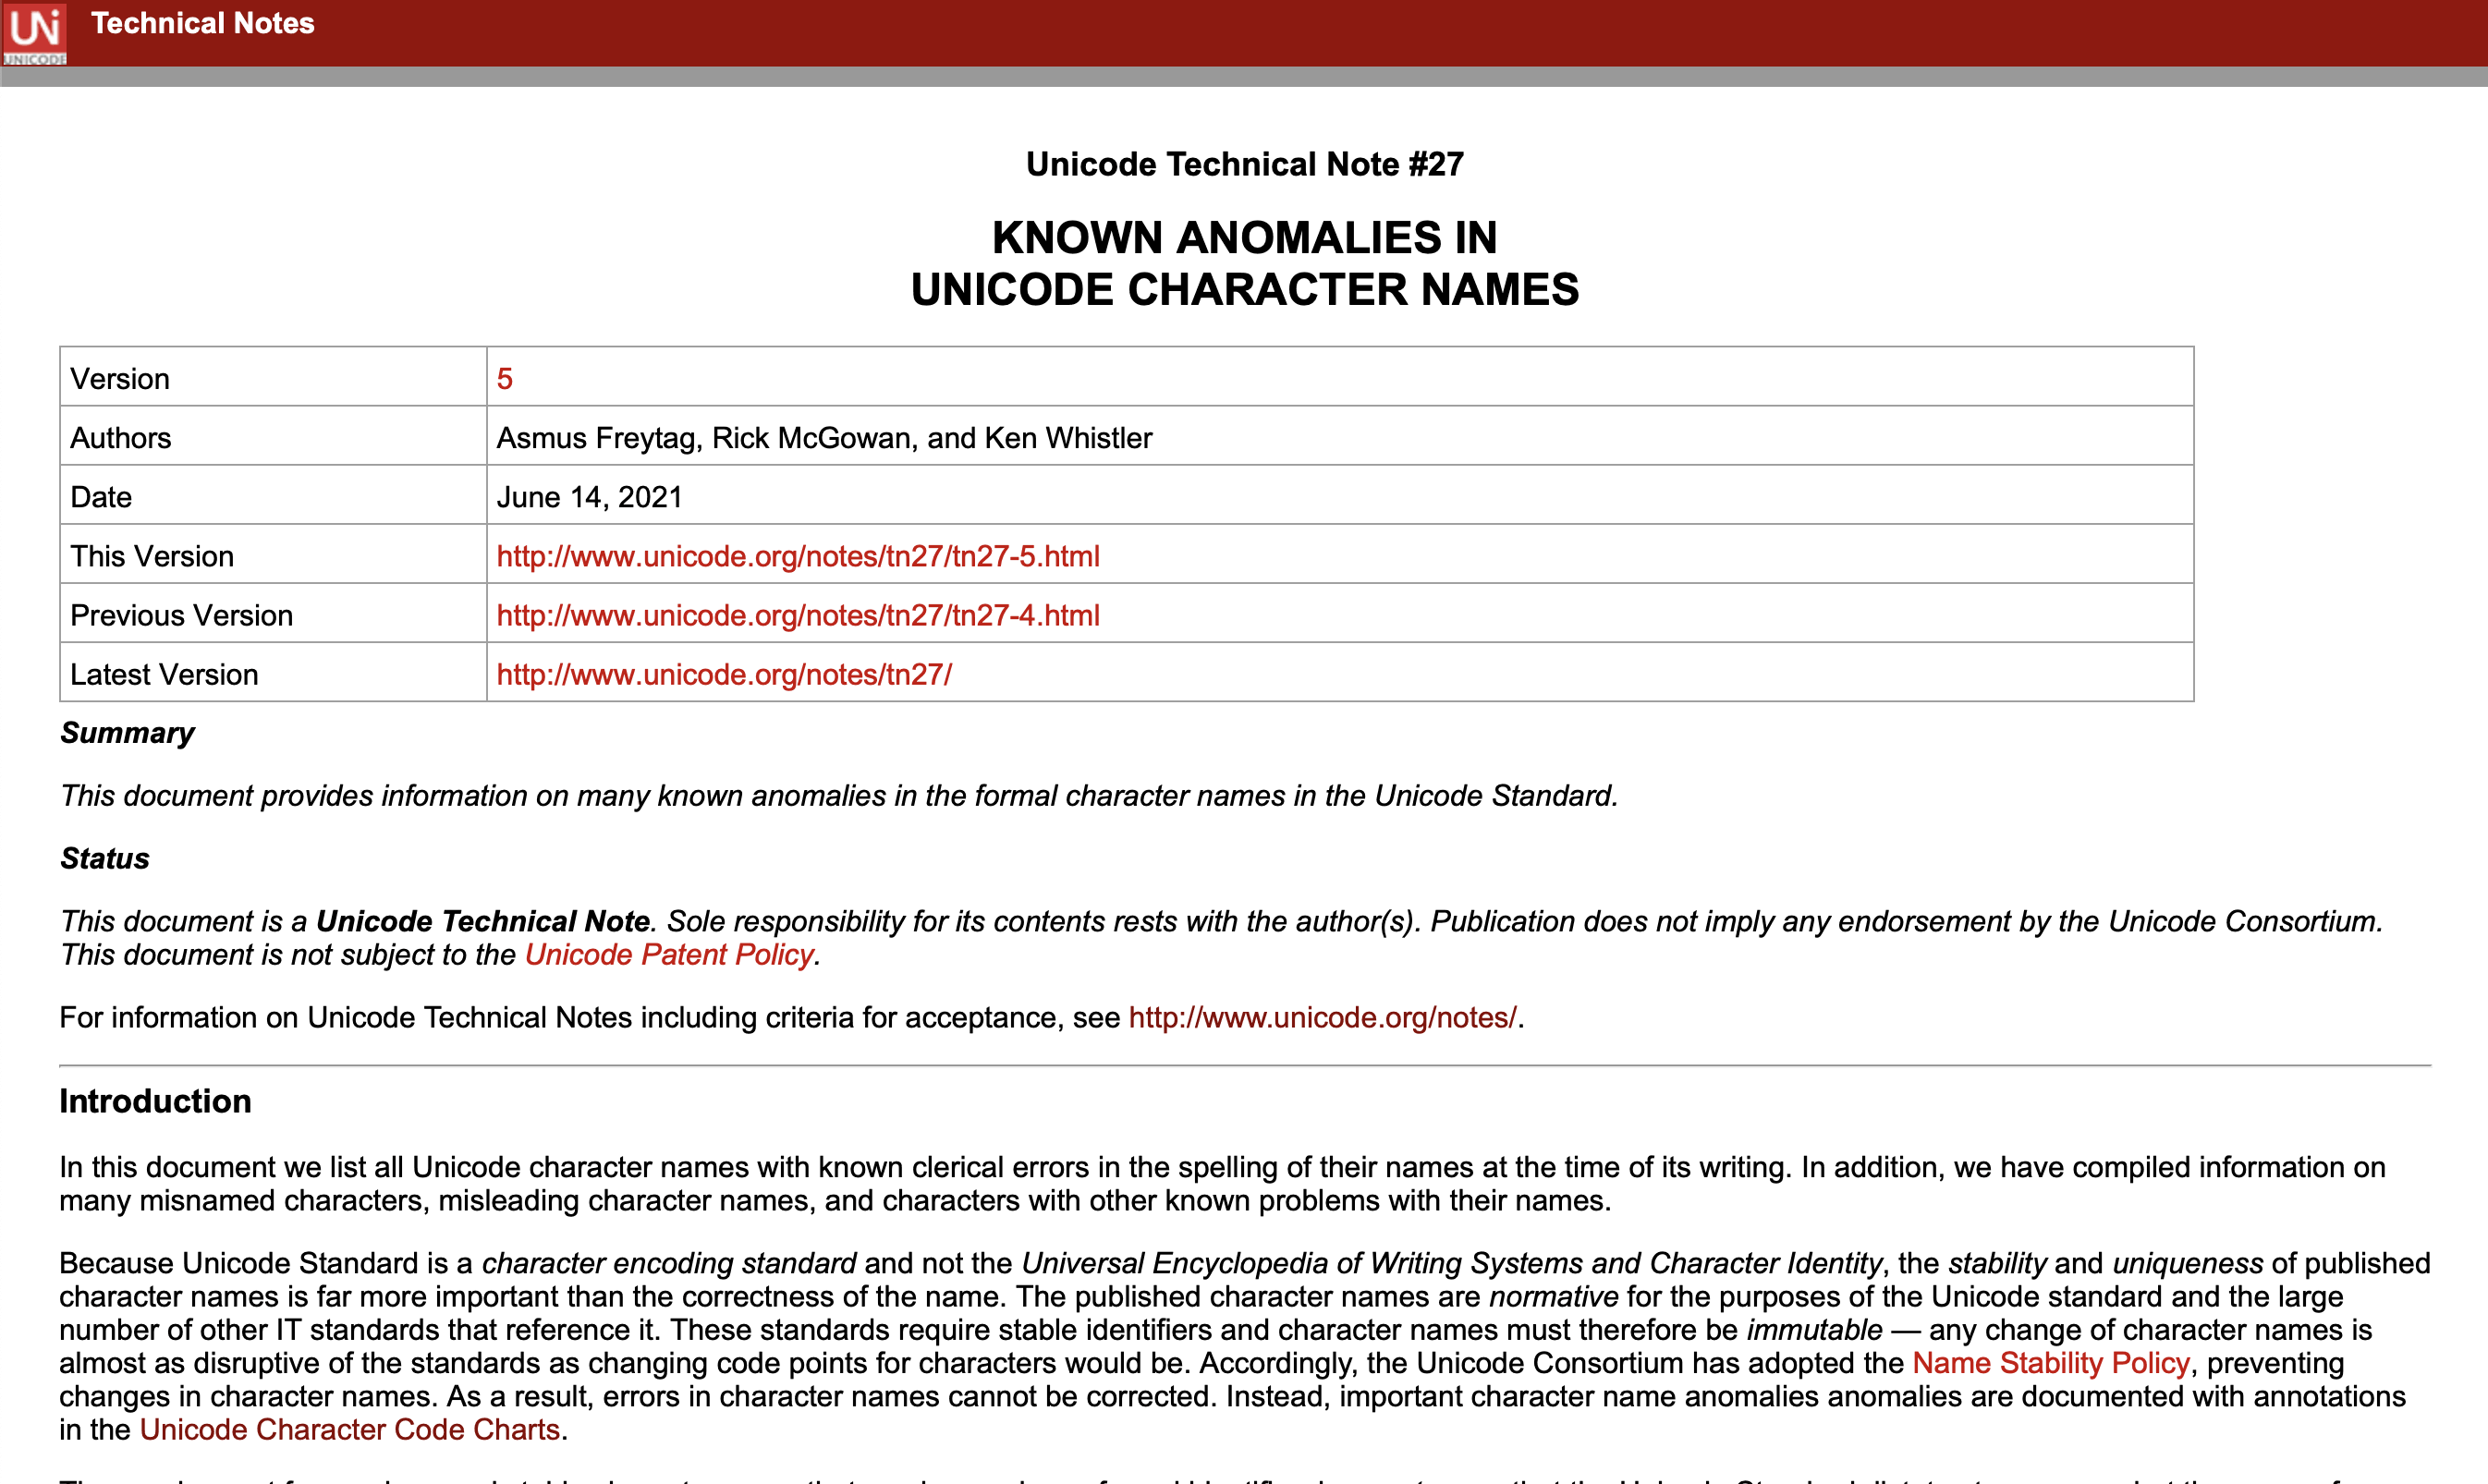 Screenshot of Unicode Technical Notes page